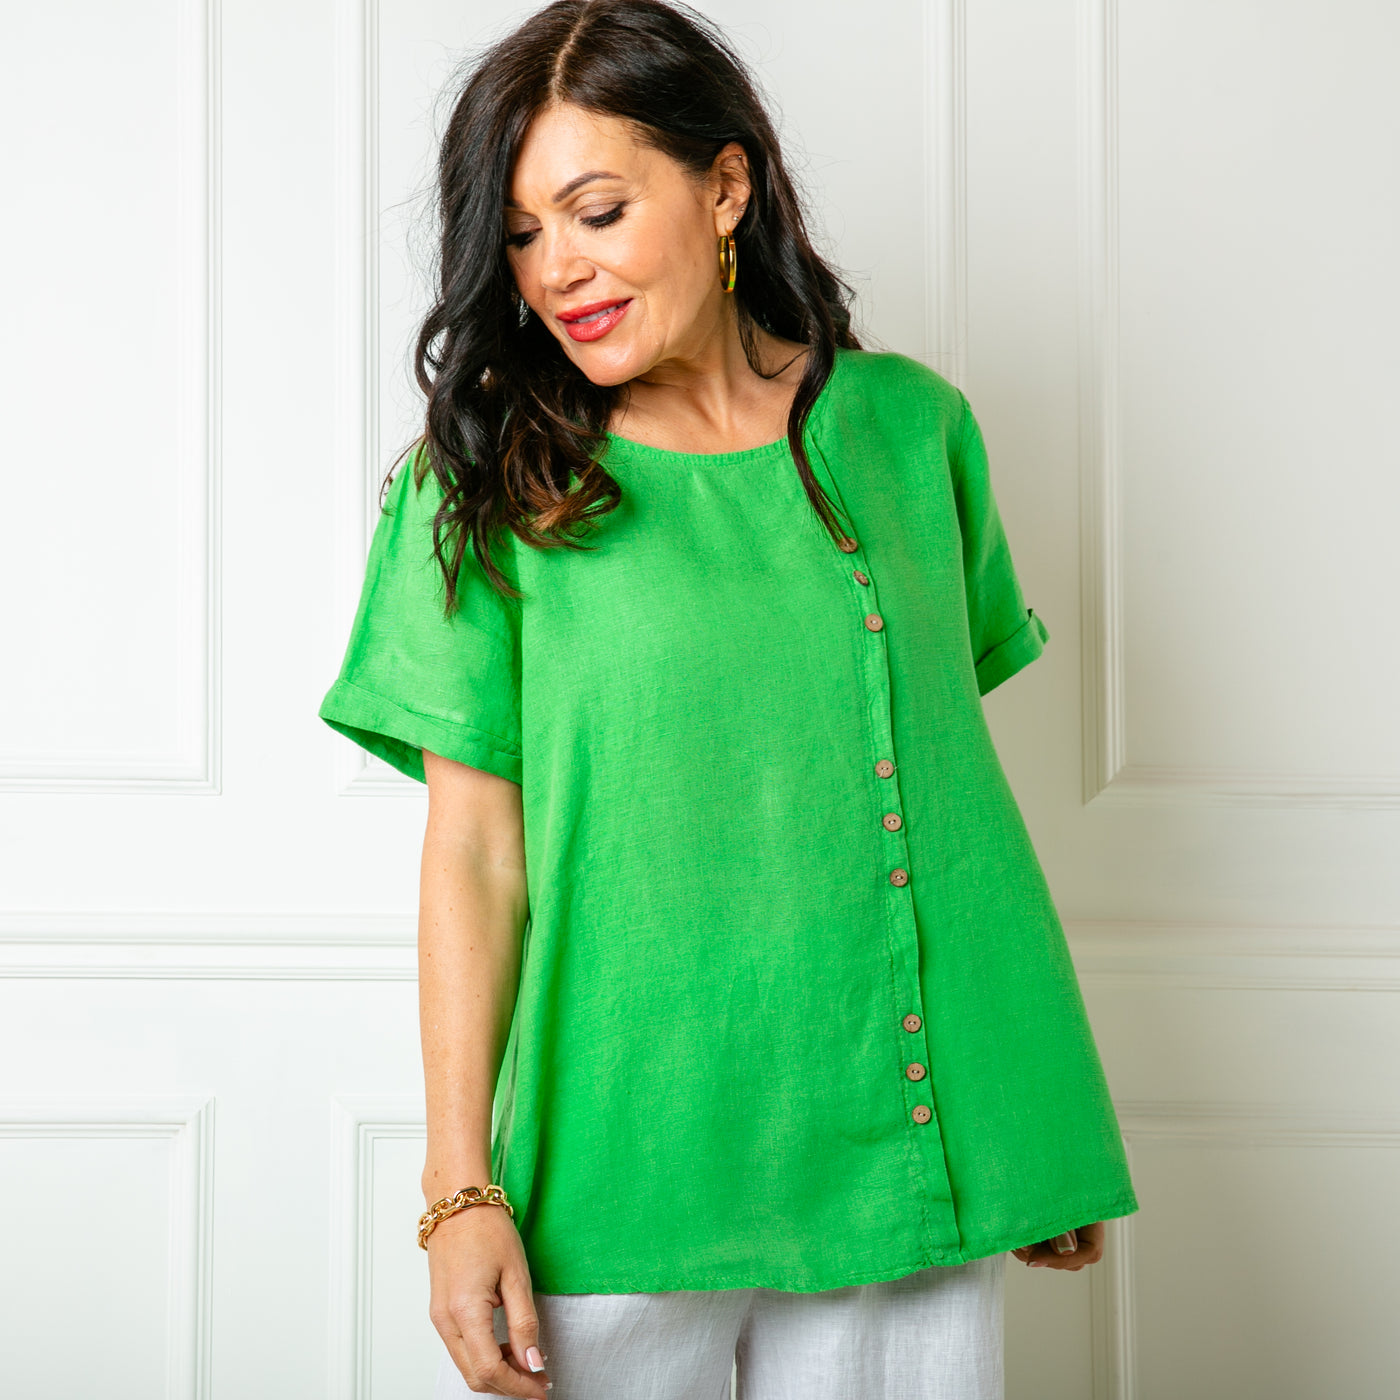 The emerald green Button Down Linen Top with short sleeves and a round neckline